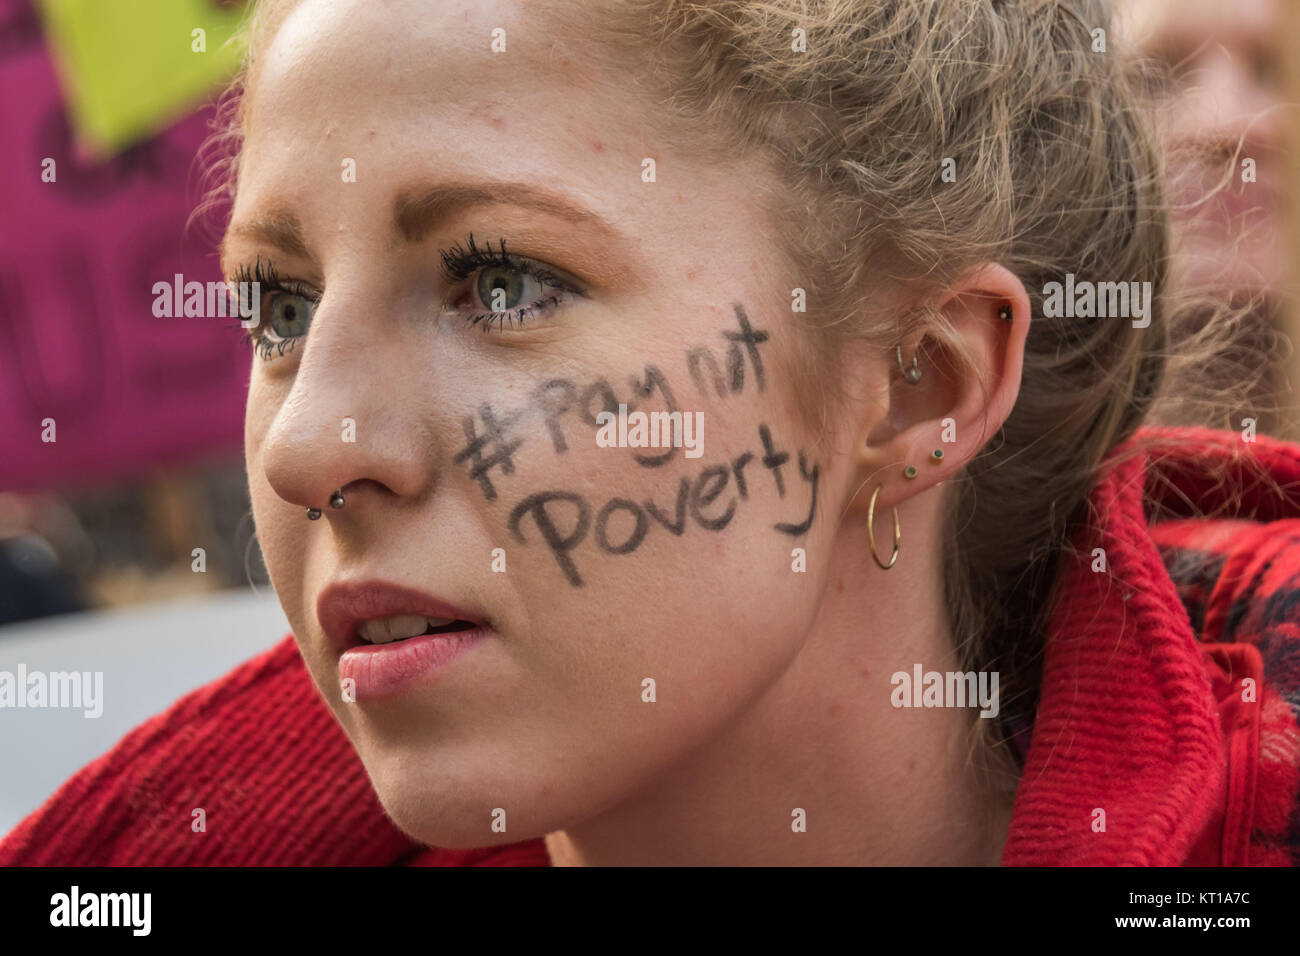 A healthcare student protesting at the Dept of Heath over axing of NHS healthcare bursaries as the hashtag #PayNotPovery on her cheek. Stock Photo